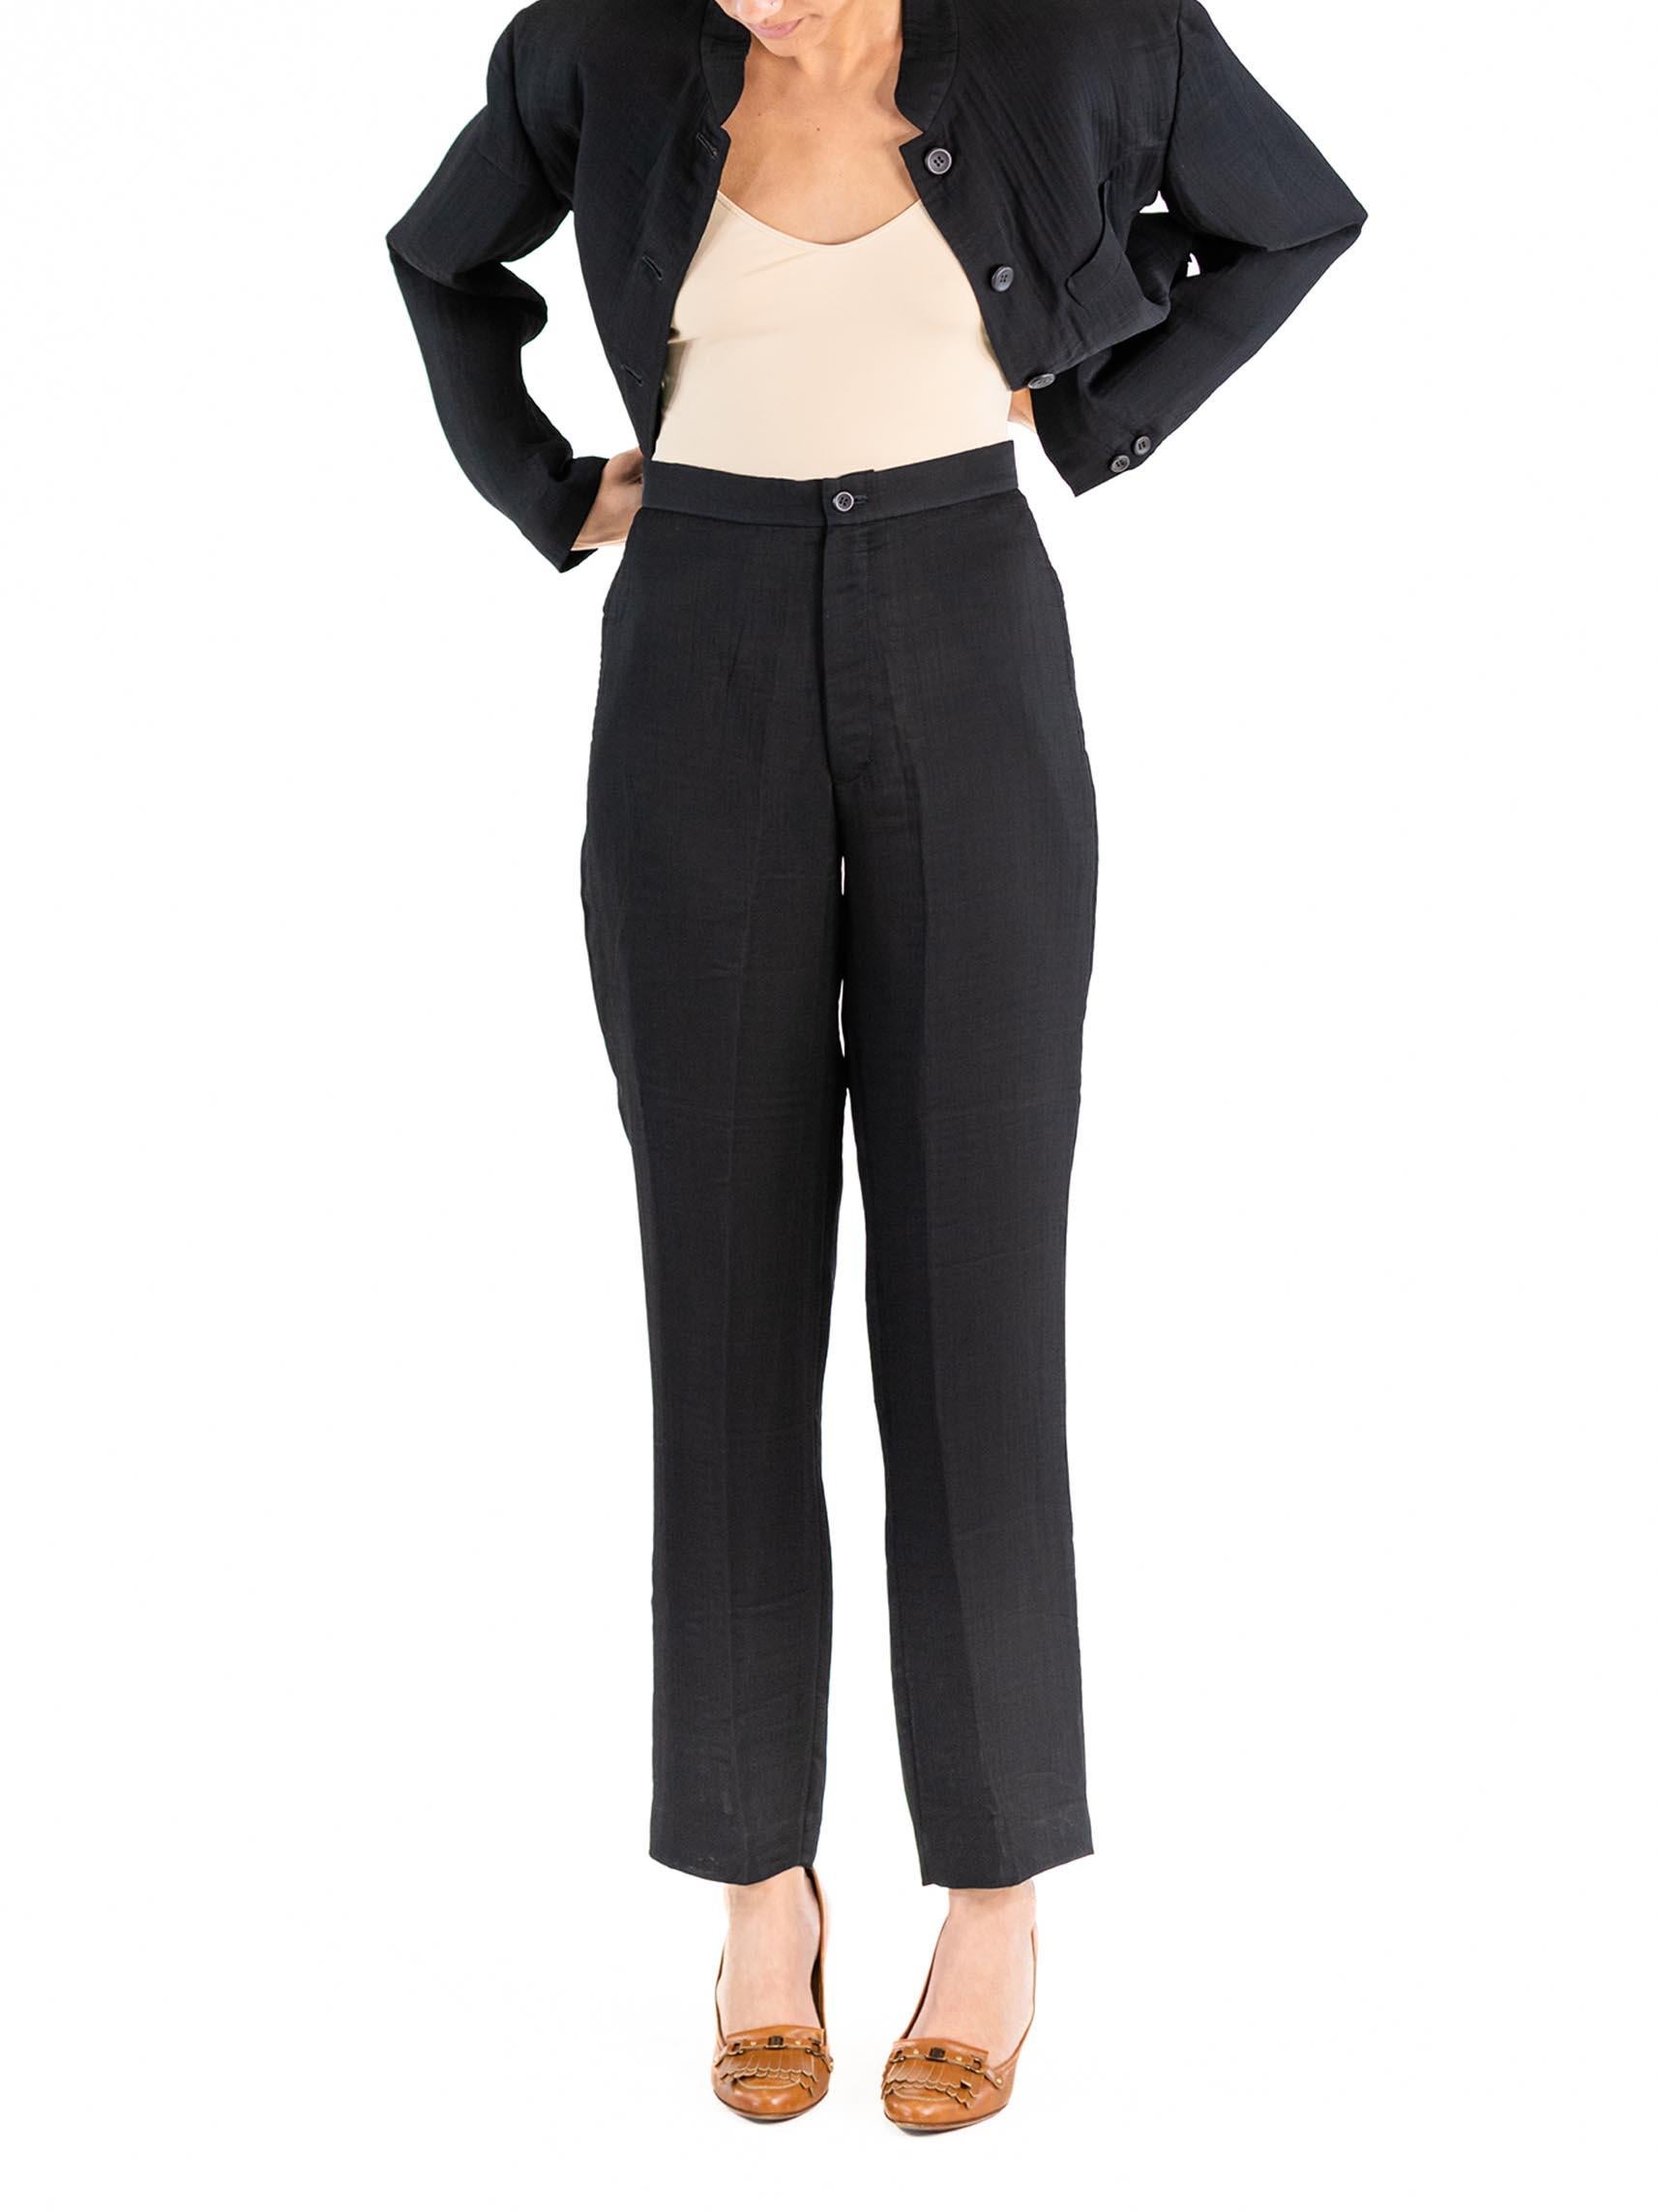 1990S ISSEY MIYAKE Black Rayon Blend Lightweight Pucker Double-Weave Pant Suit For Sale 2